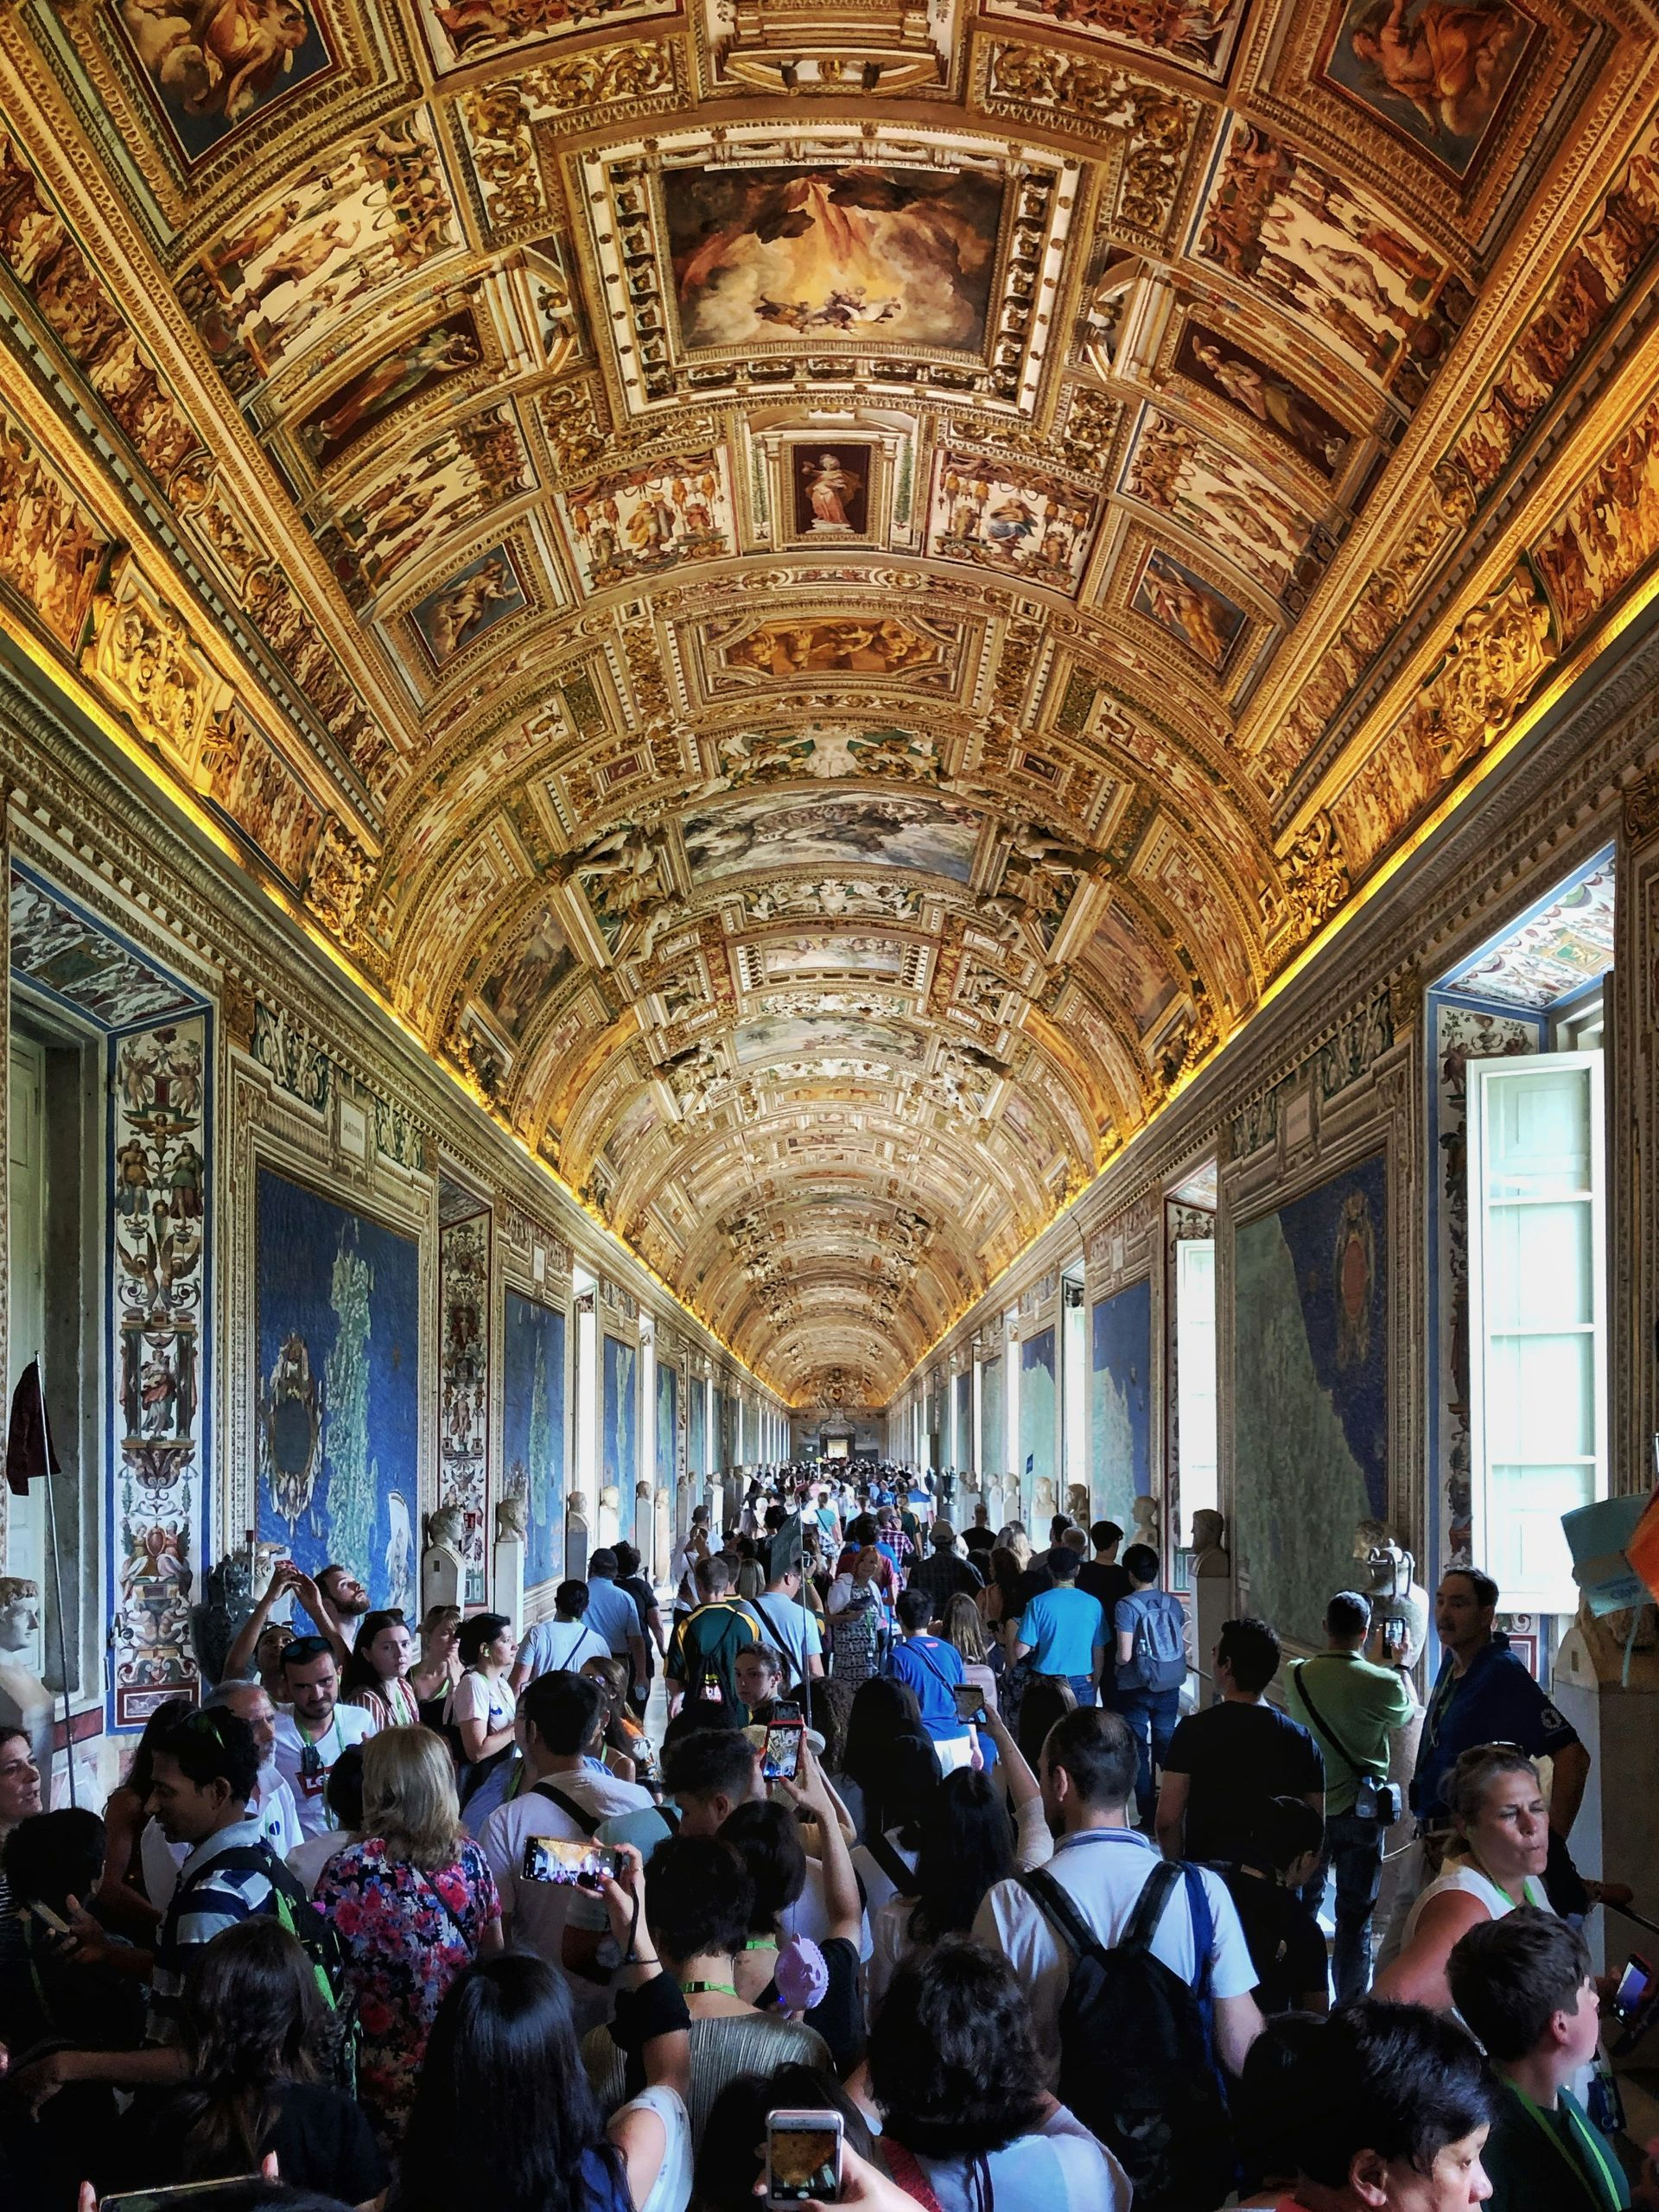 The best time to visit the Sistine Chapel